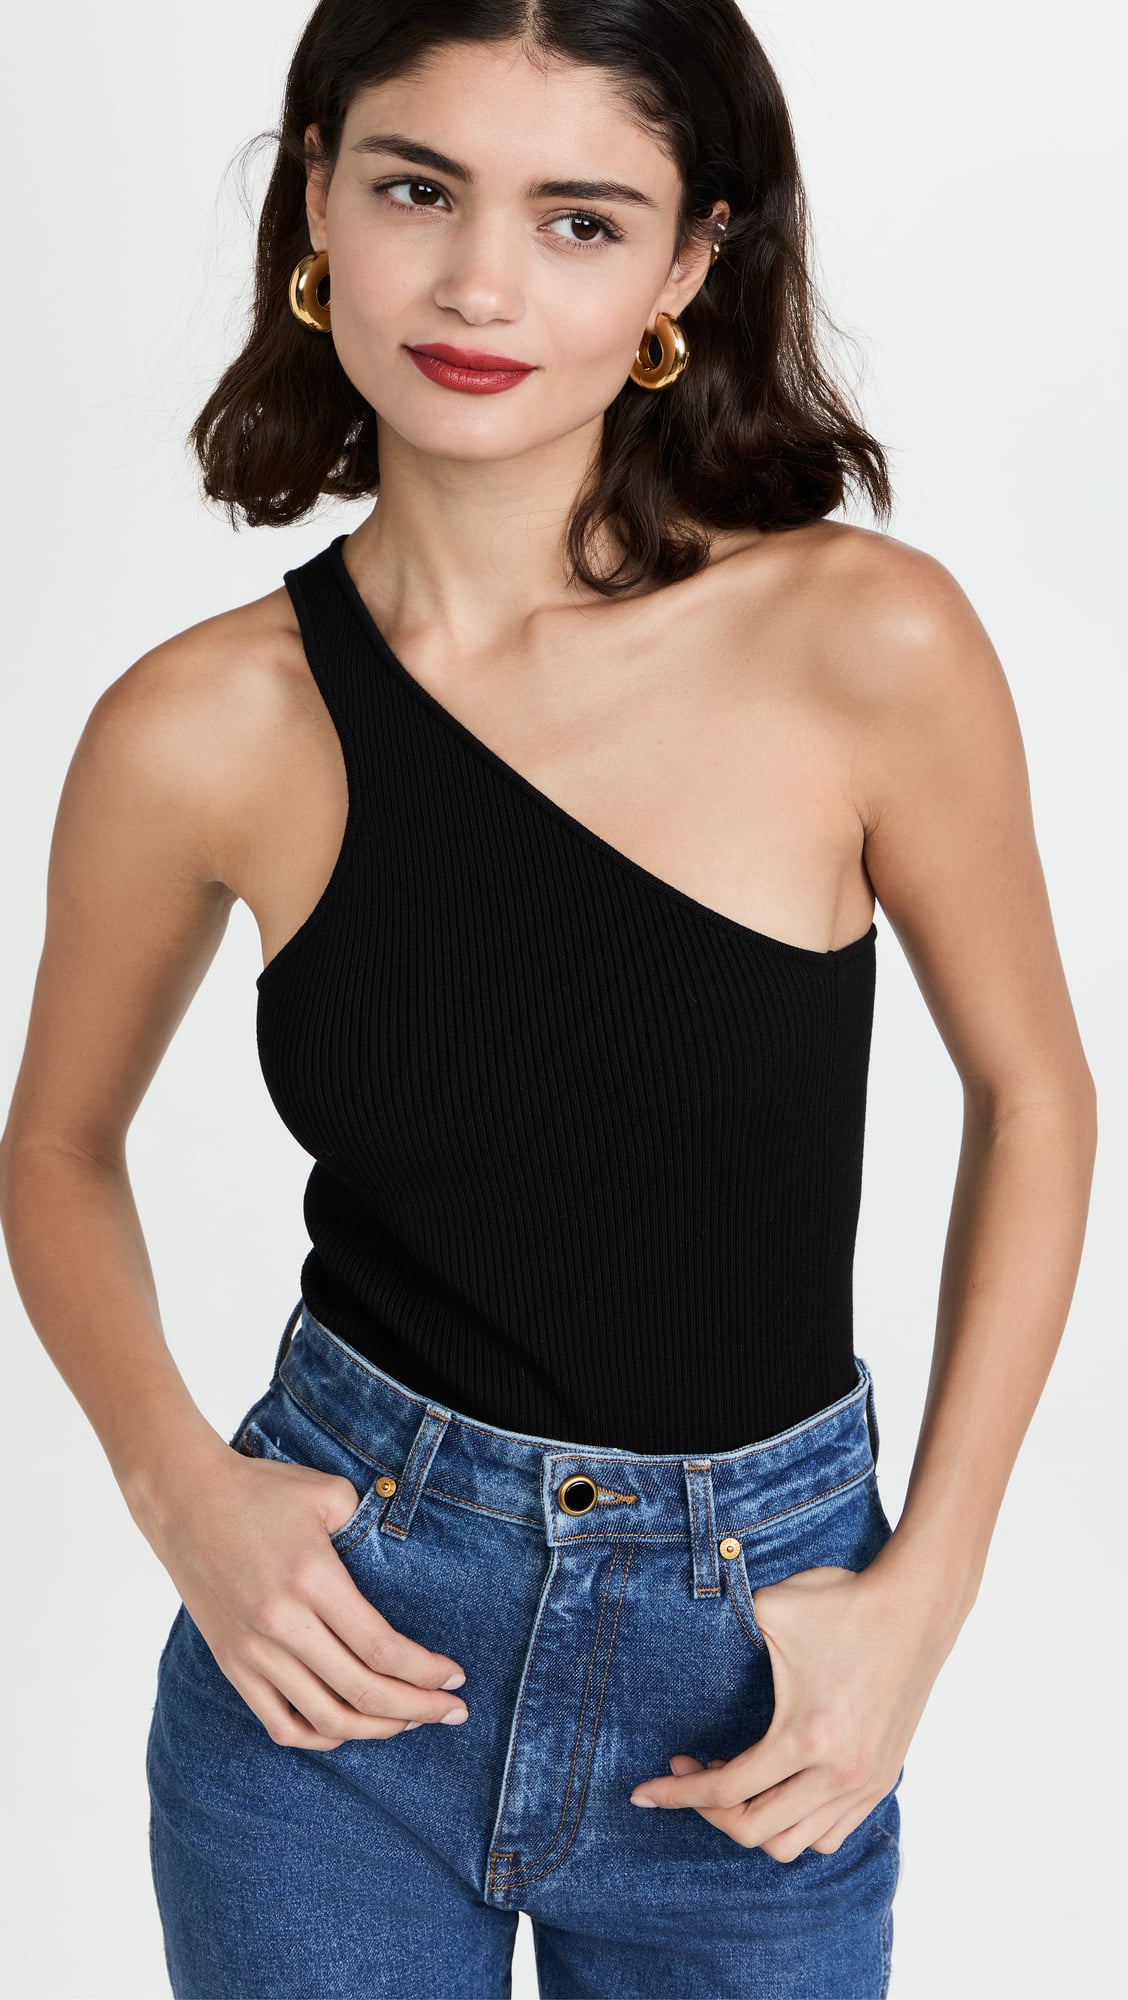 A Classic Little Black Top: Sokie Collective One Shoulder Going Out Top | 35 Pieces That Make Some Seriously Jaw-Dropping 21st Birthday Outfits | POPSUGAR Photo 3